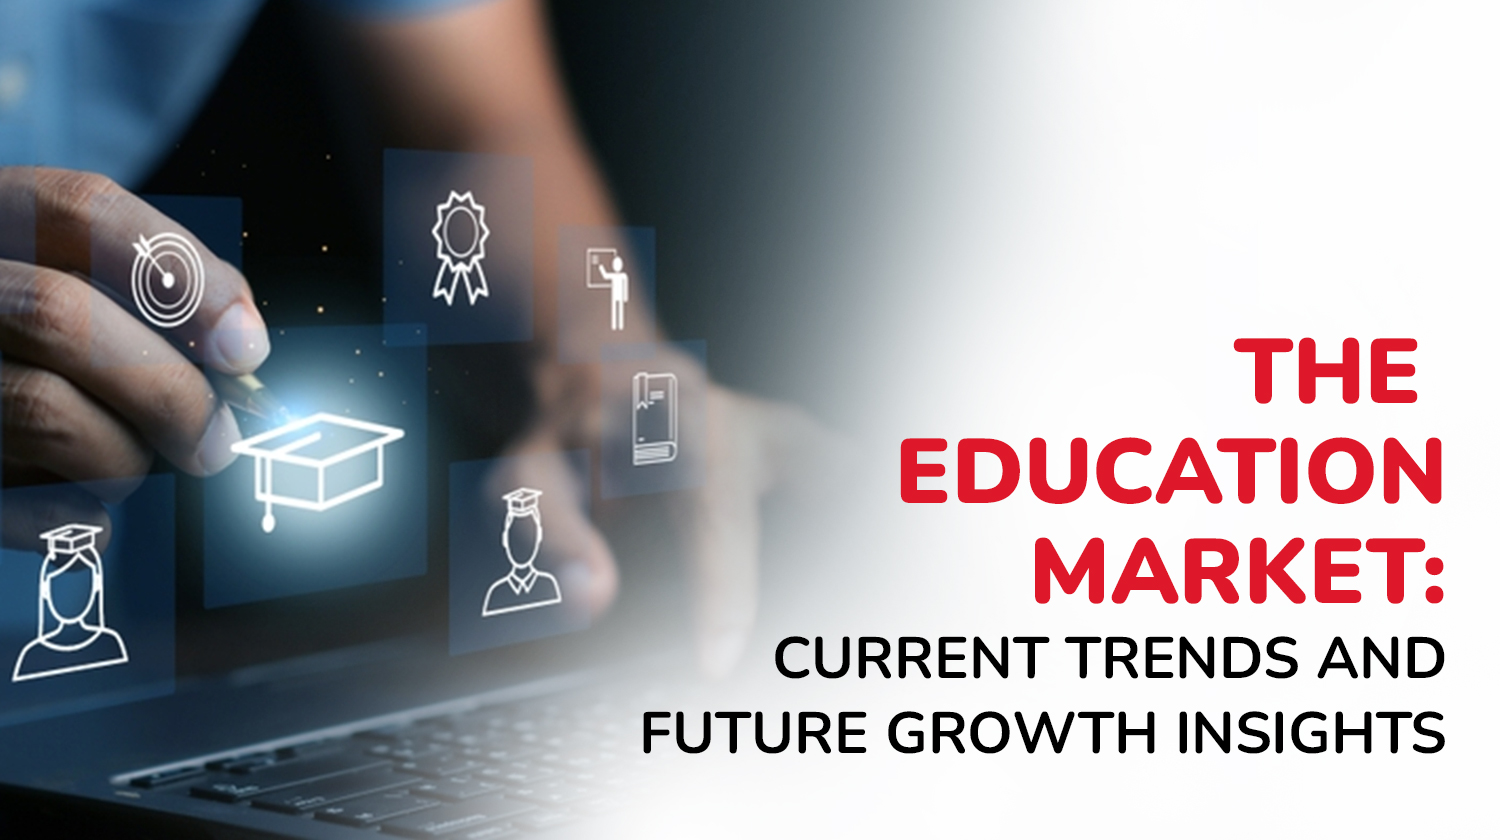 The Education Market: Current Trends and Future Growth Insights